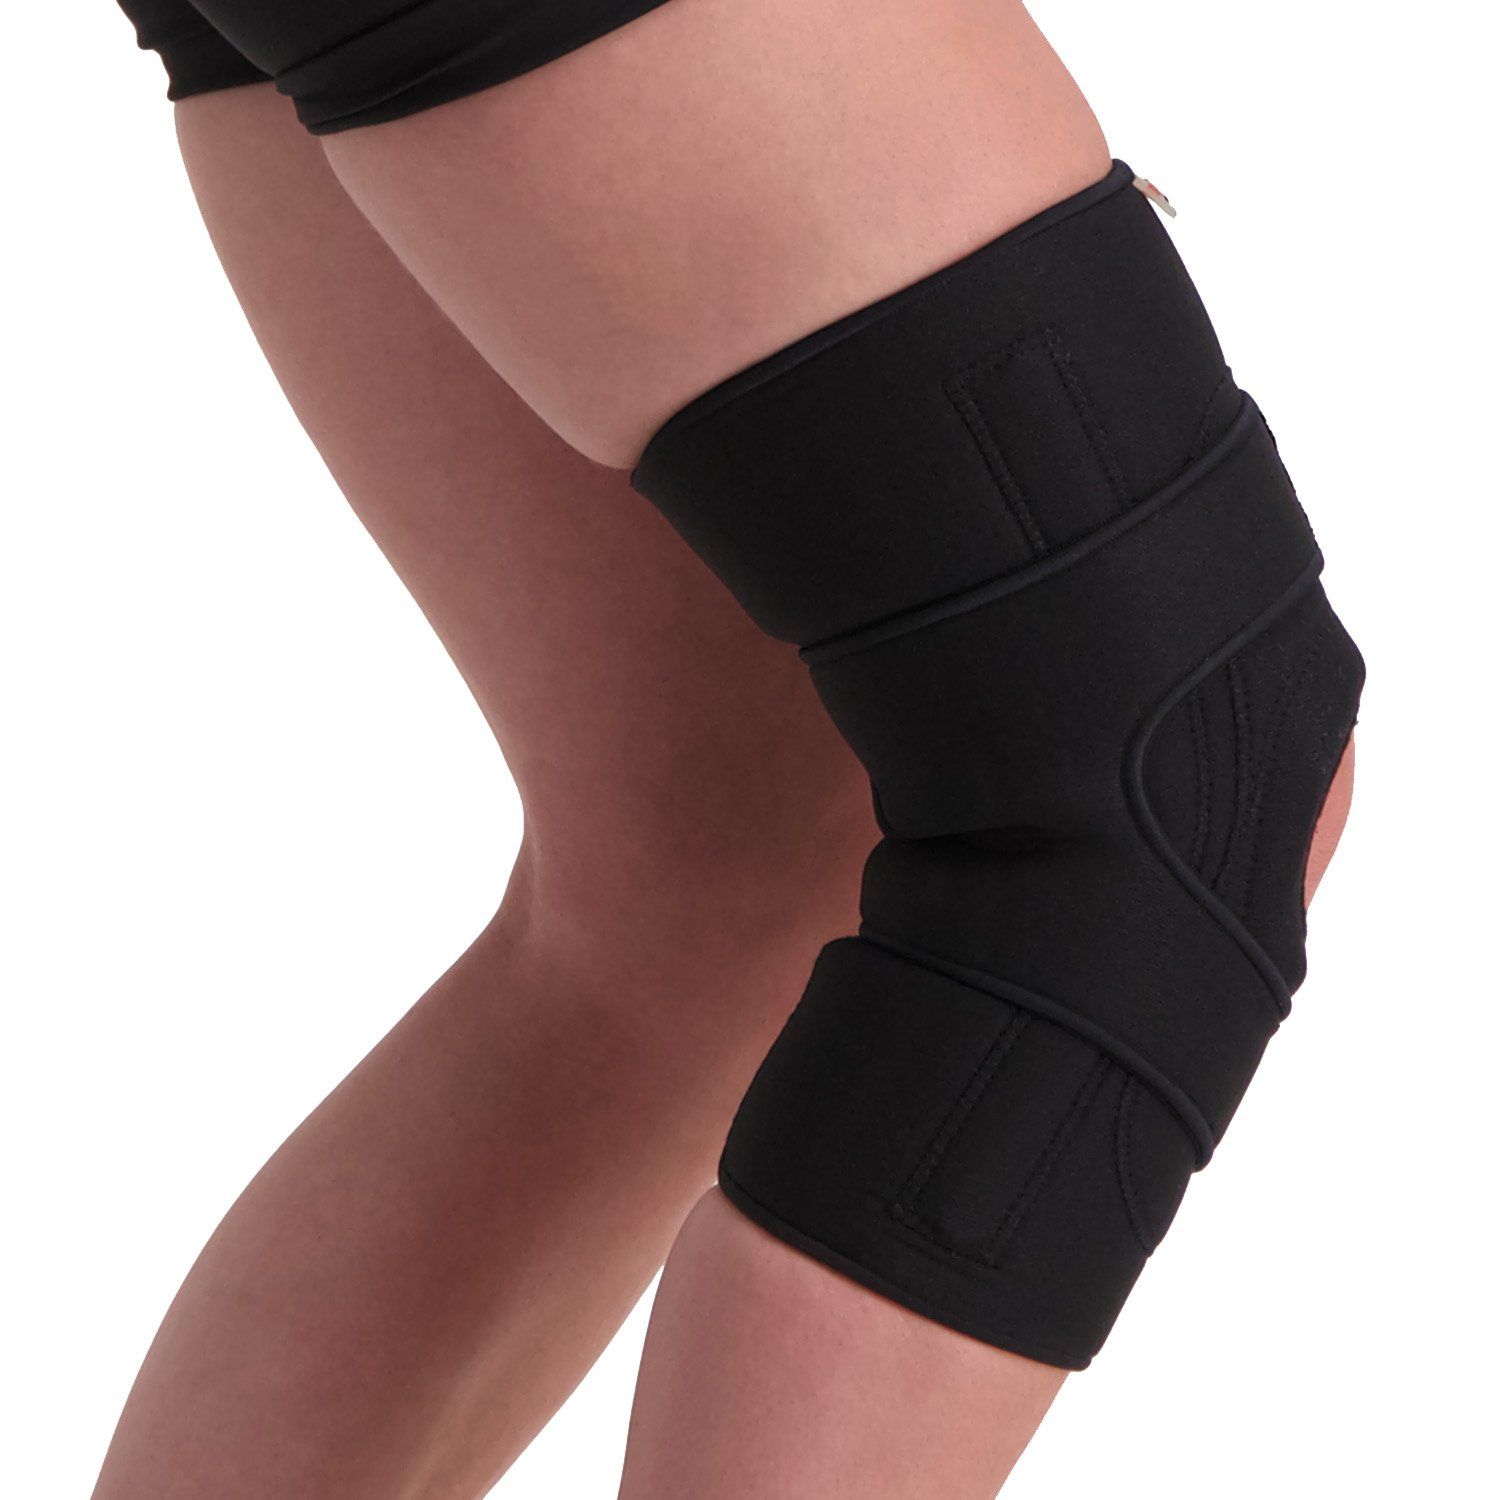 super ortho lightweight knee support with splints in black